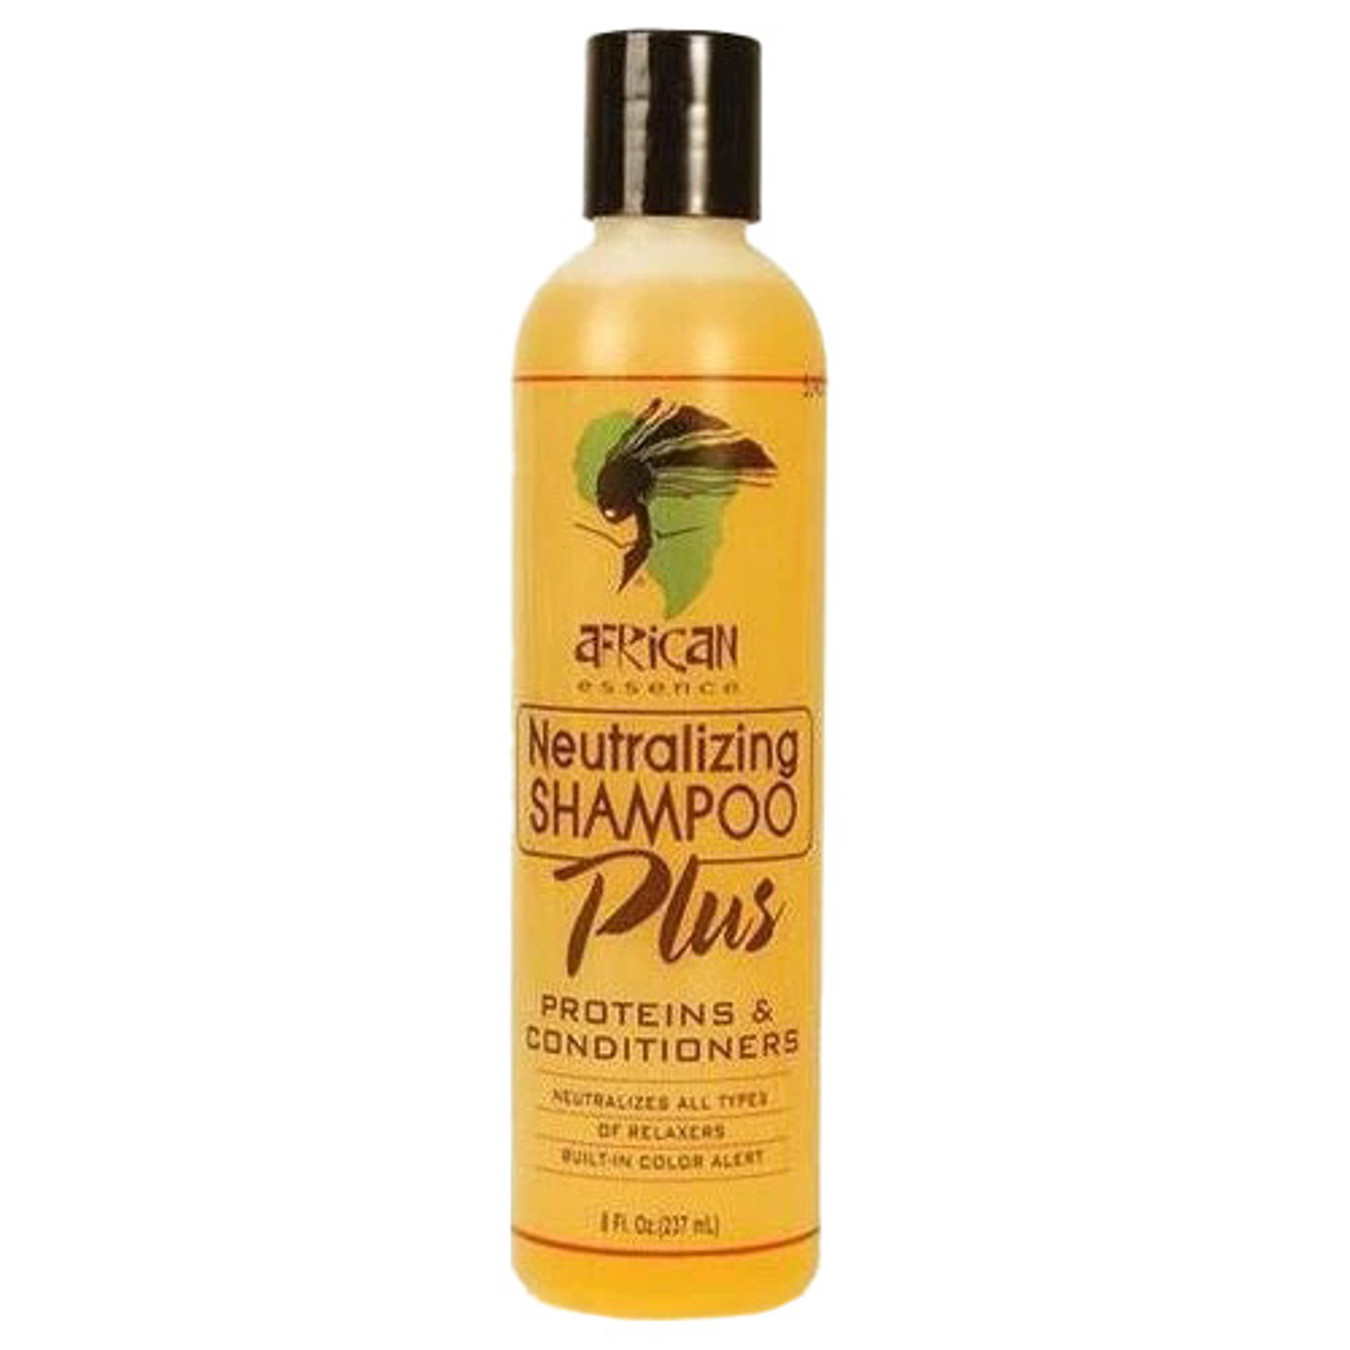 African Essence Neutralizing Shampoo Plus Proteins & Conditioners (8 oz)